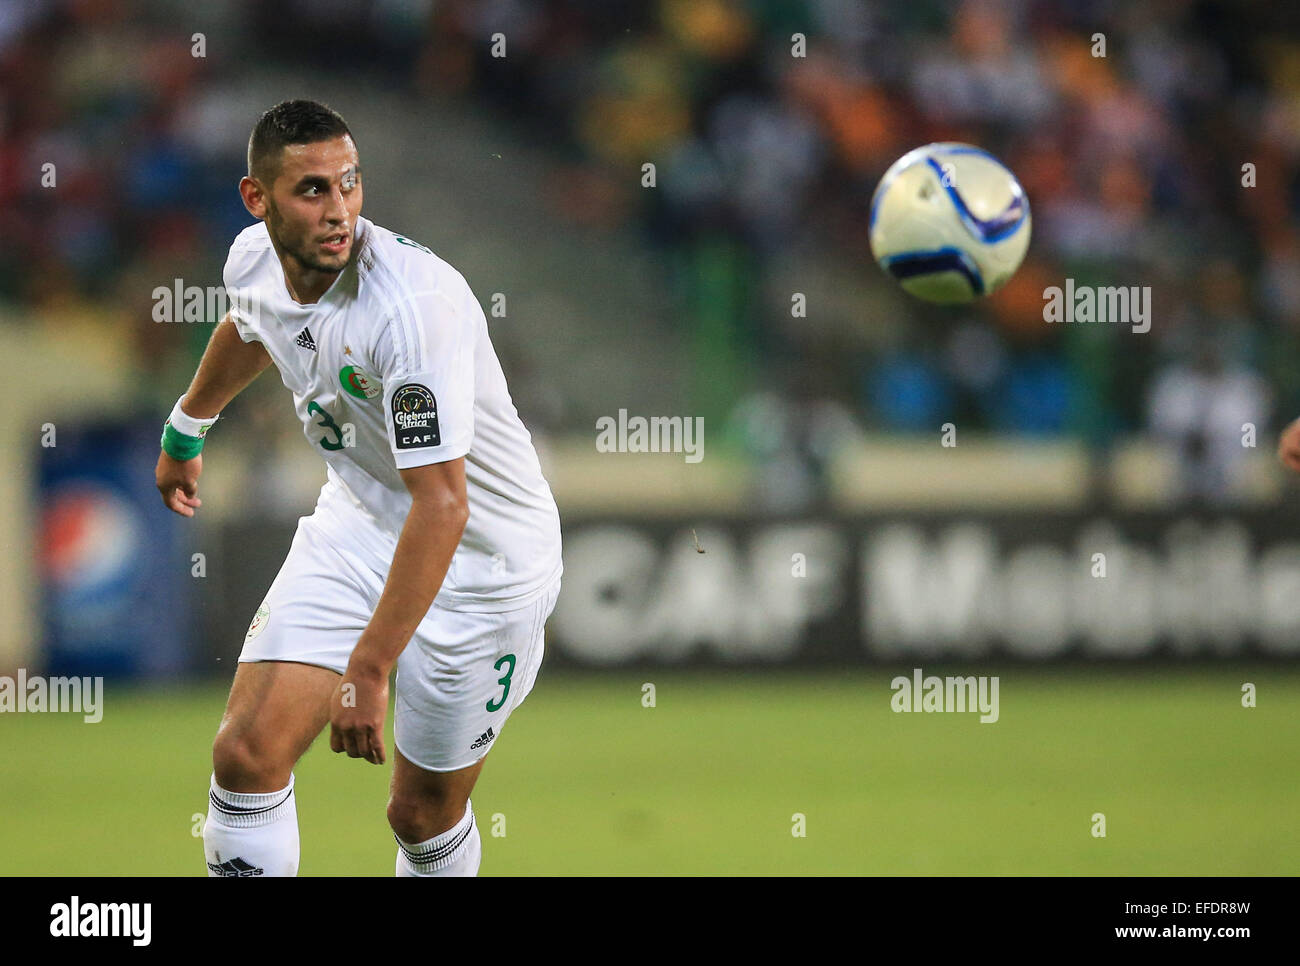 Malabo, Equatorial Guinea. 1st Feb, 2015. Faouzi Ghoulam of Algeria passes the ball during a quarterfinal match of Africa Cup of Nations against Cote d'Ivoire in Malabo, Equatorial Guinea, Feb. 1, 2015. Cote d'Ivoire won 3-1. Credit:  Meng Chenguang/Xinhua/Alamy Live News Stock Photo